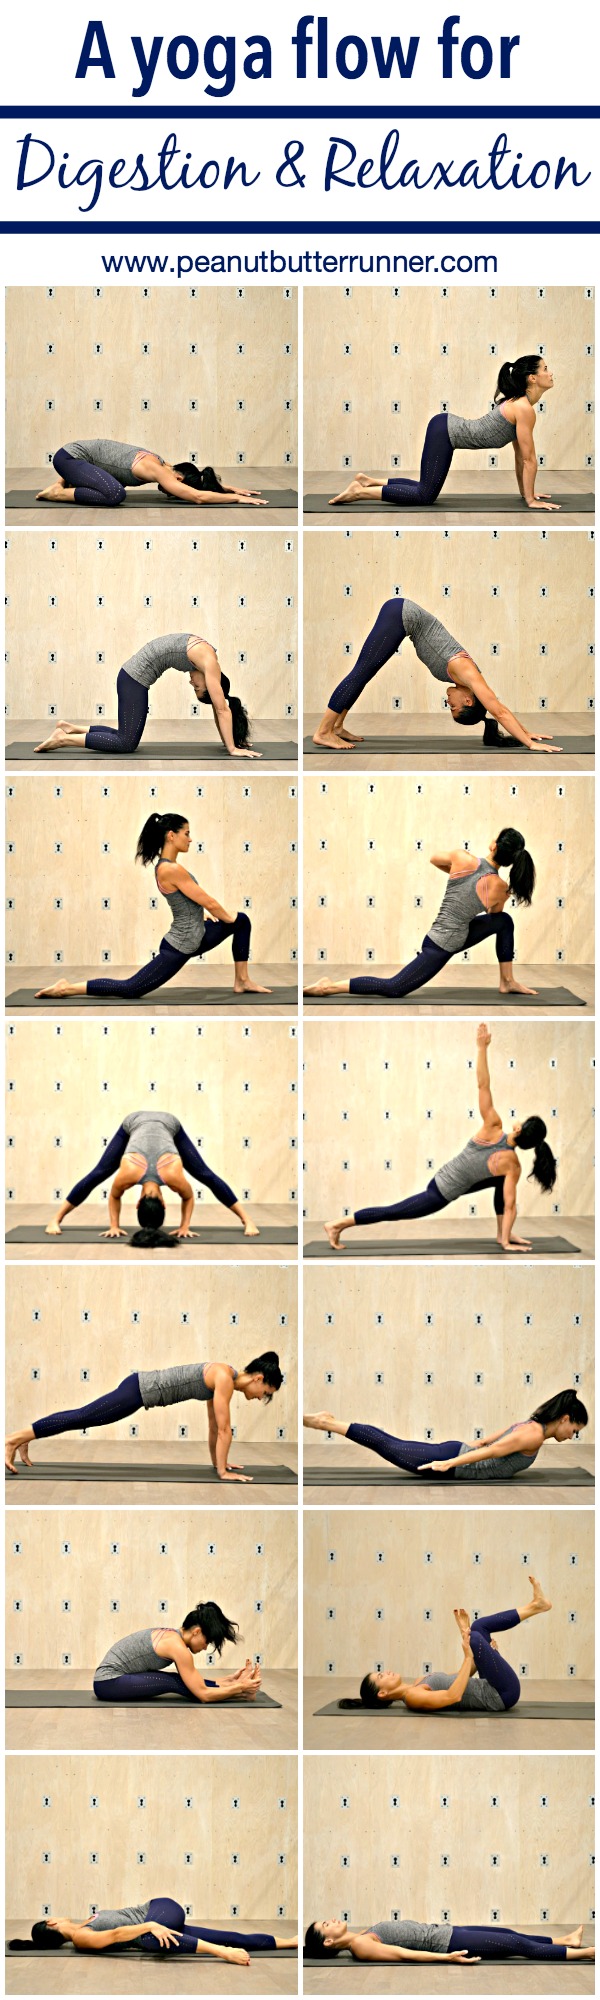 Yoga Poses to Help Digestion - 10 Minute Class to relieve bloating and gas